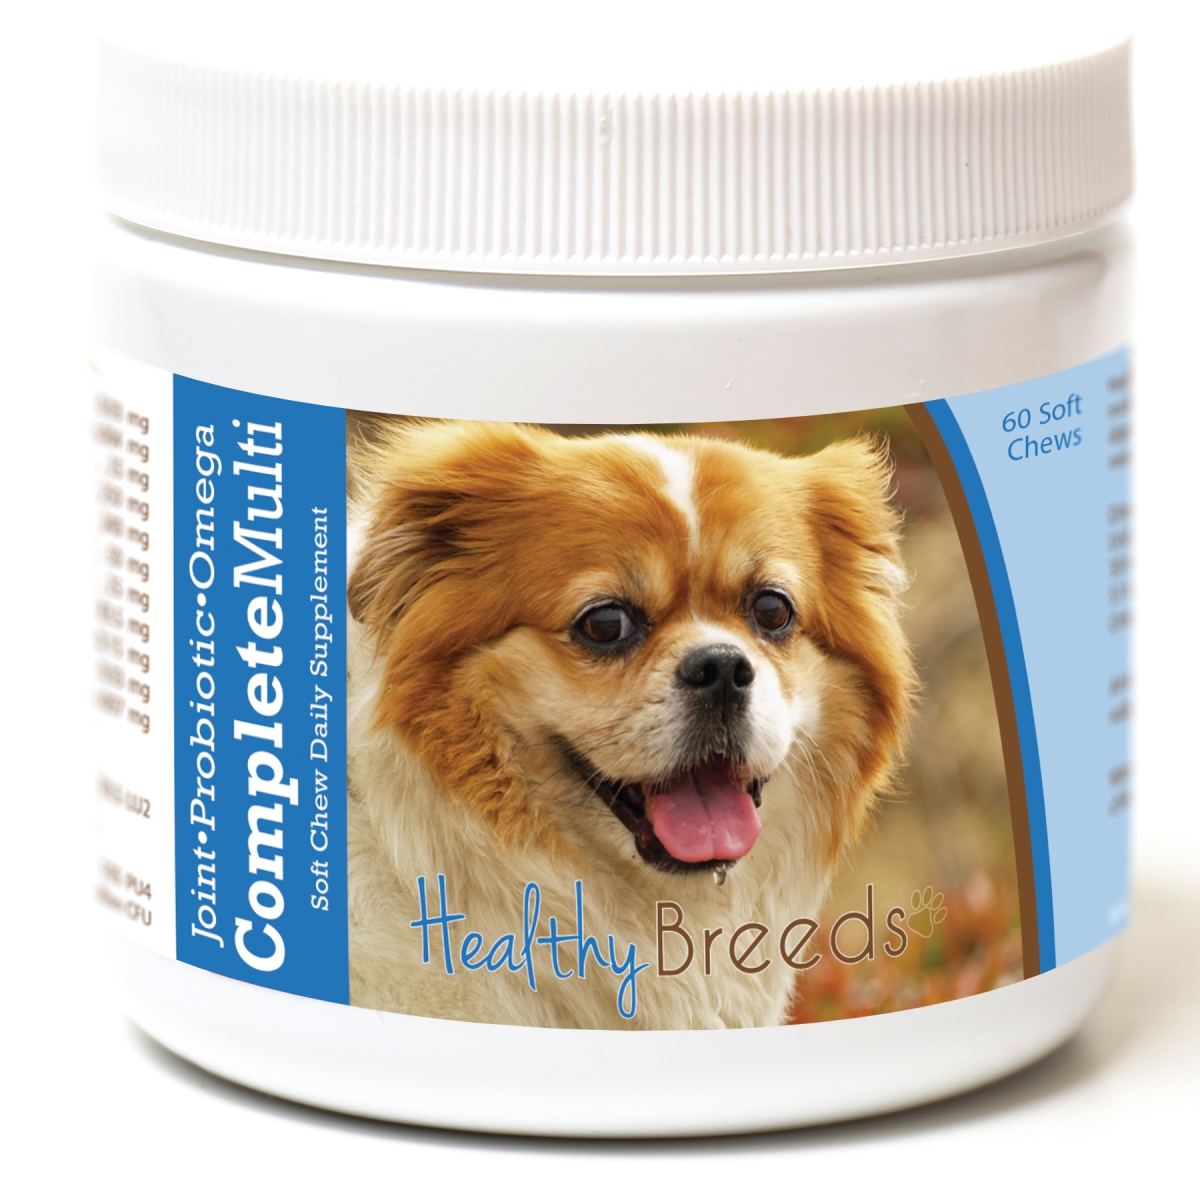 Picture of Healthy Breeds 192959009217 Tibetan Spaniel all in one Multivitamin Soft Chew - 60 Count